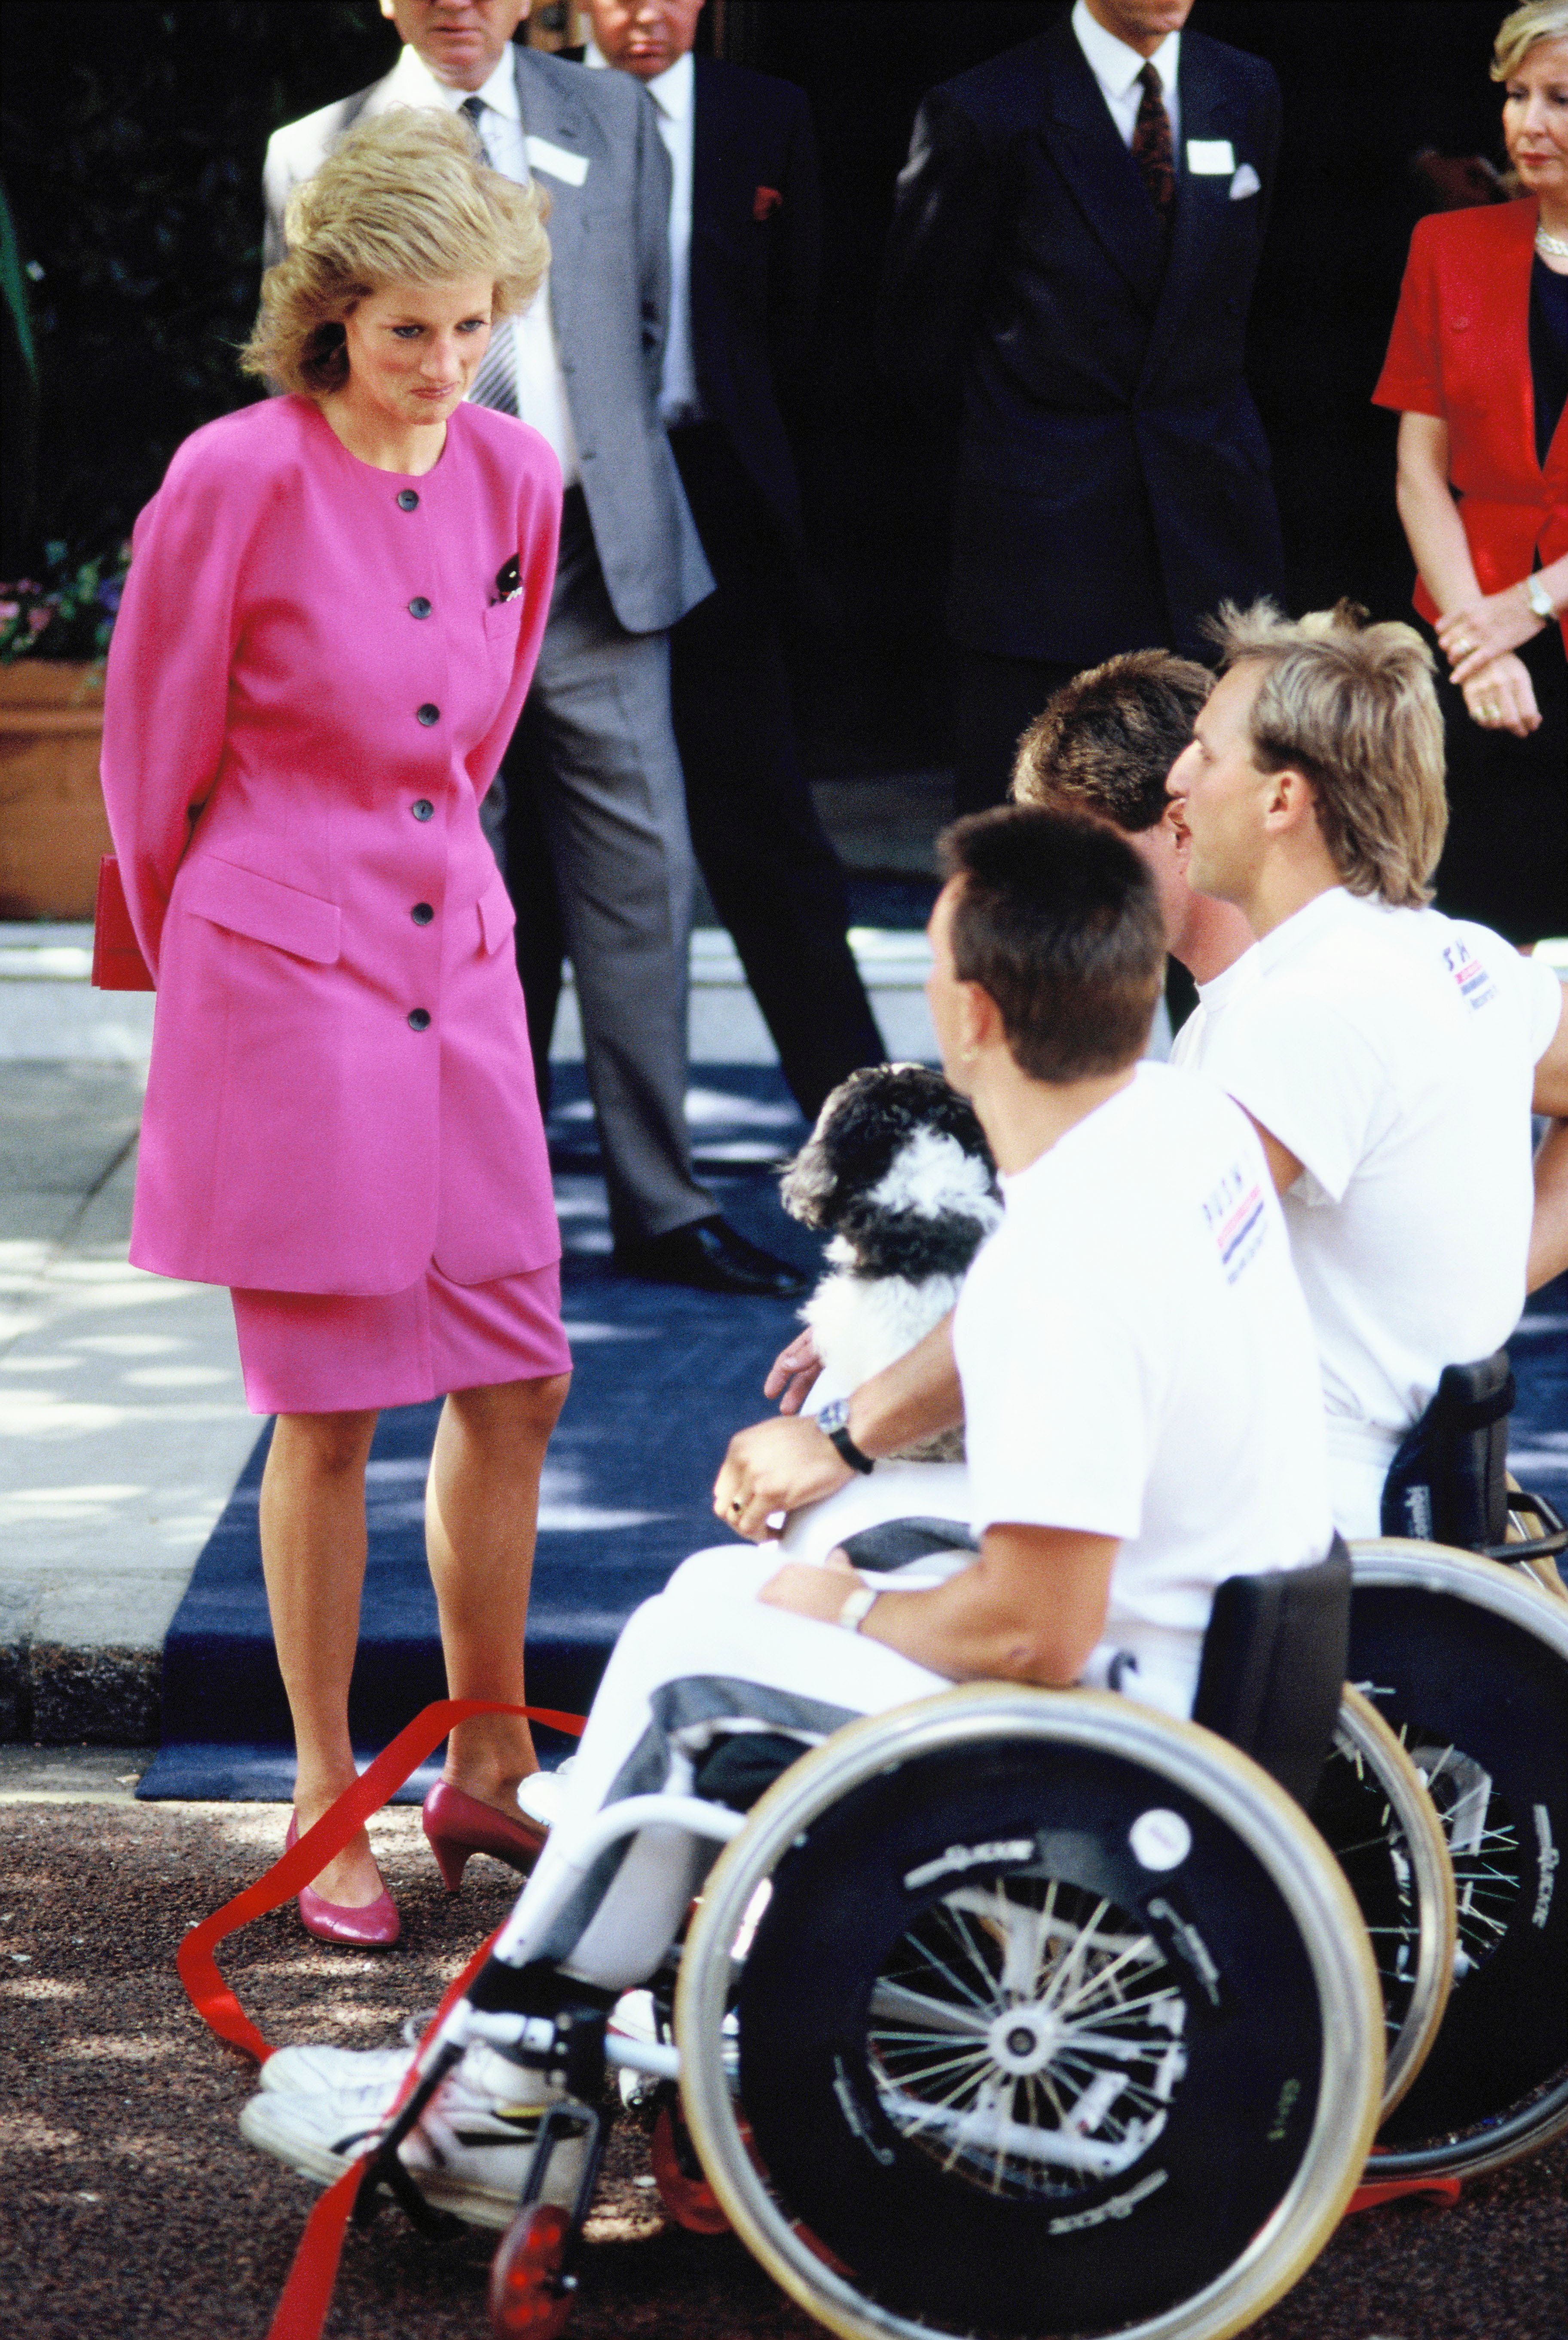 Diana, Princess of Wales, visits people in wheelchairs in 1988. | Source: Getty Images